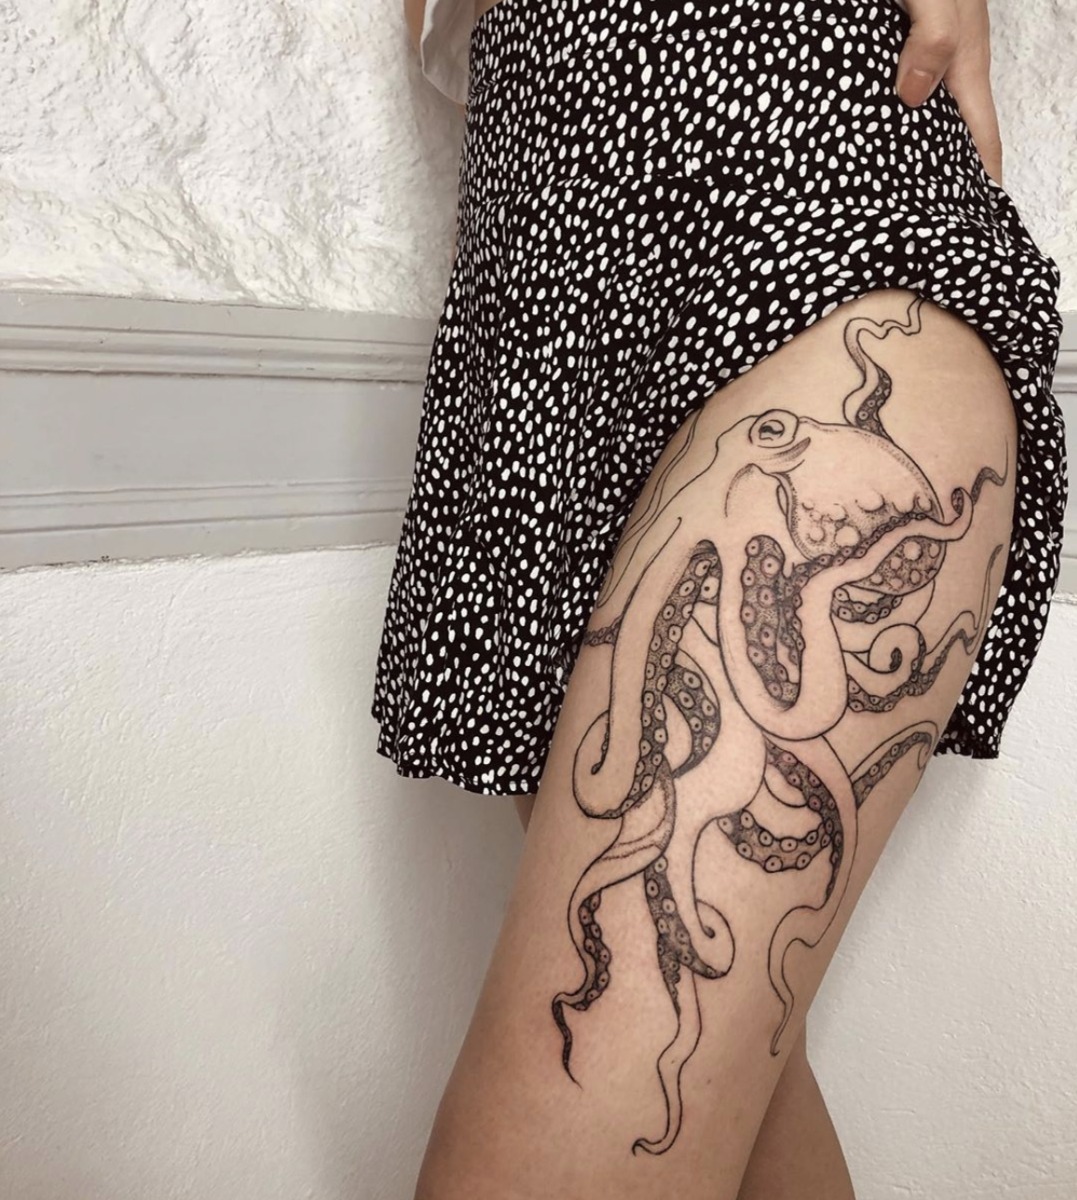 Female octopus tattoo meaning